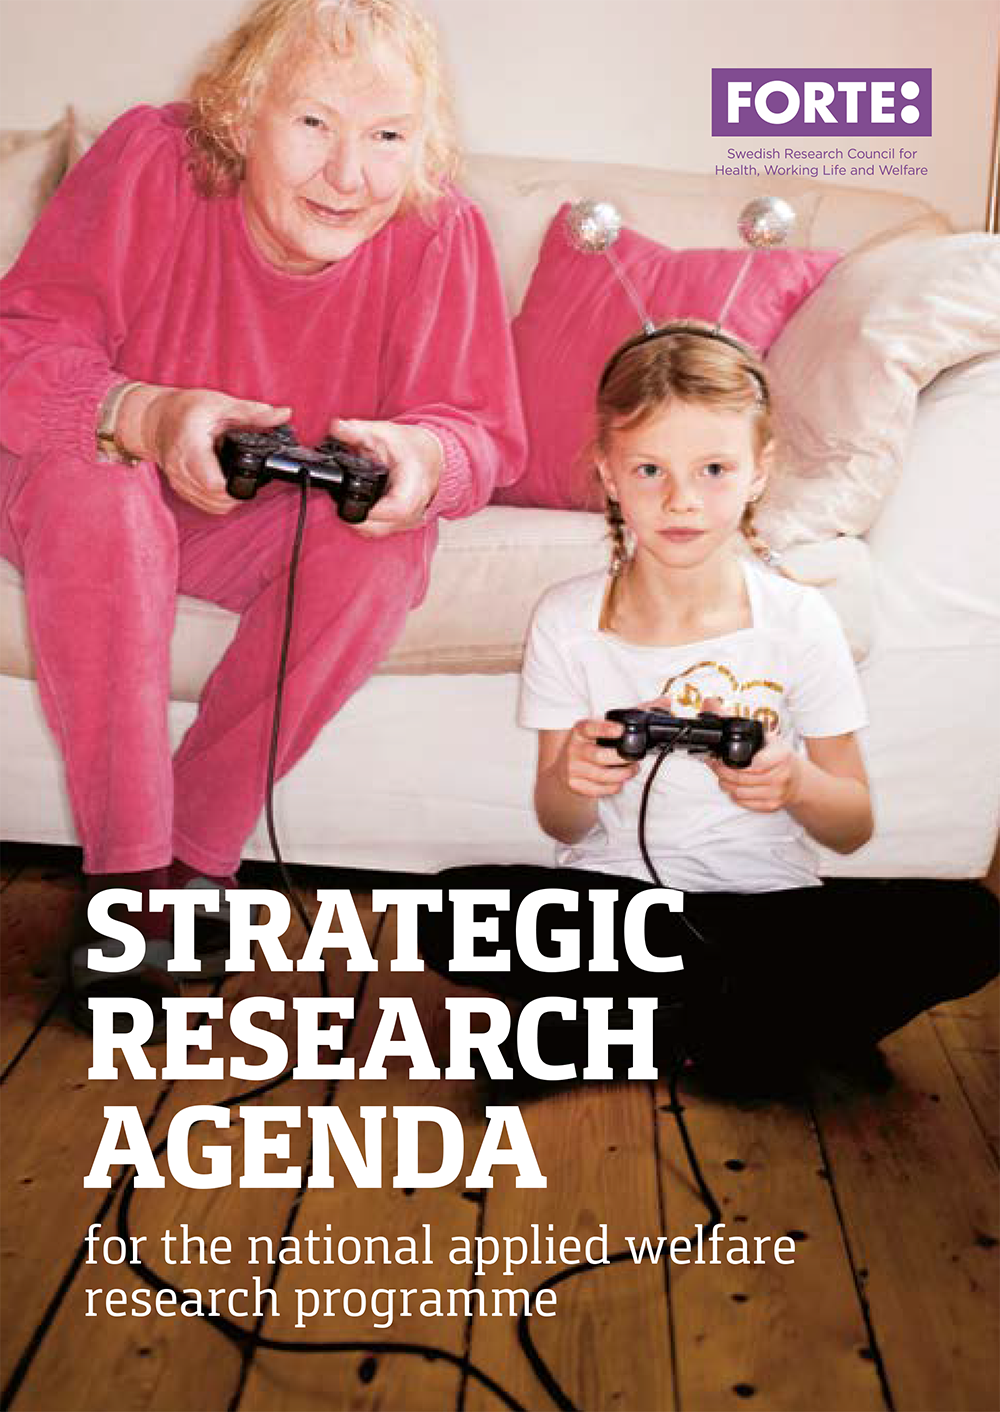 Strategic research agenda for the national applied welfare research programme